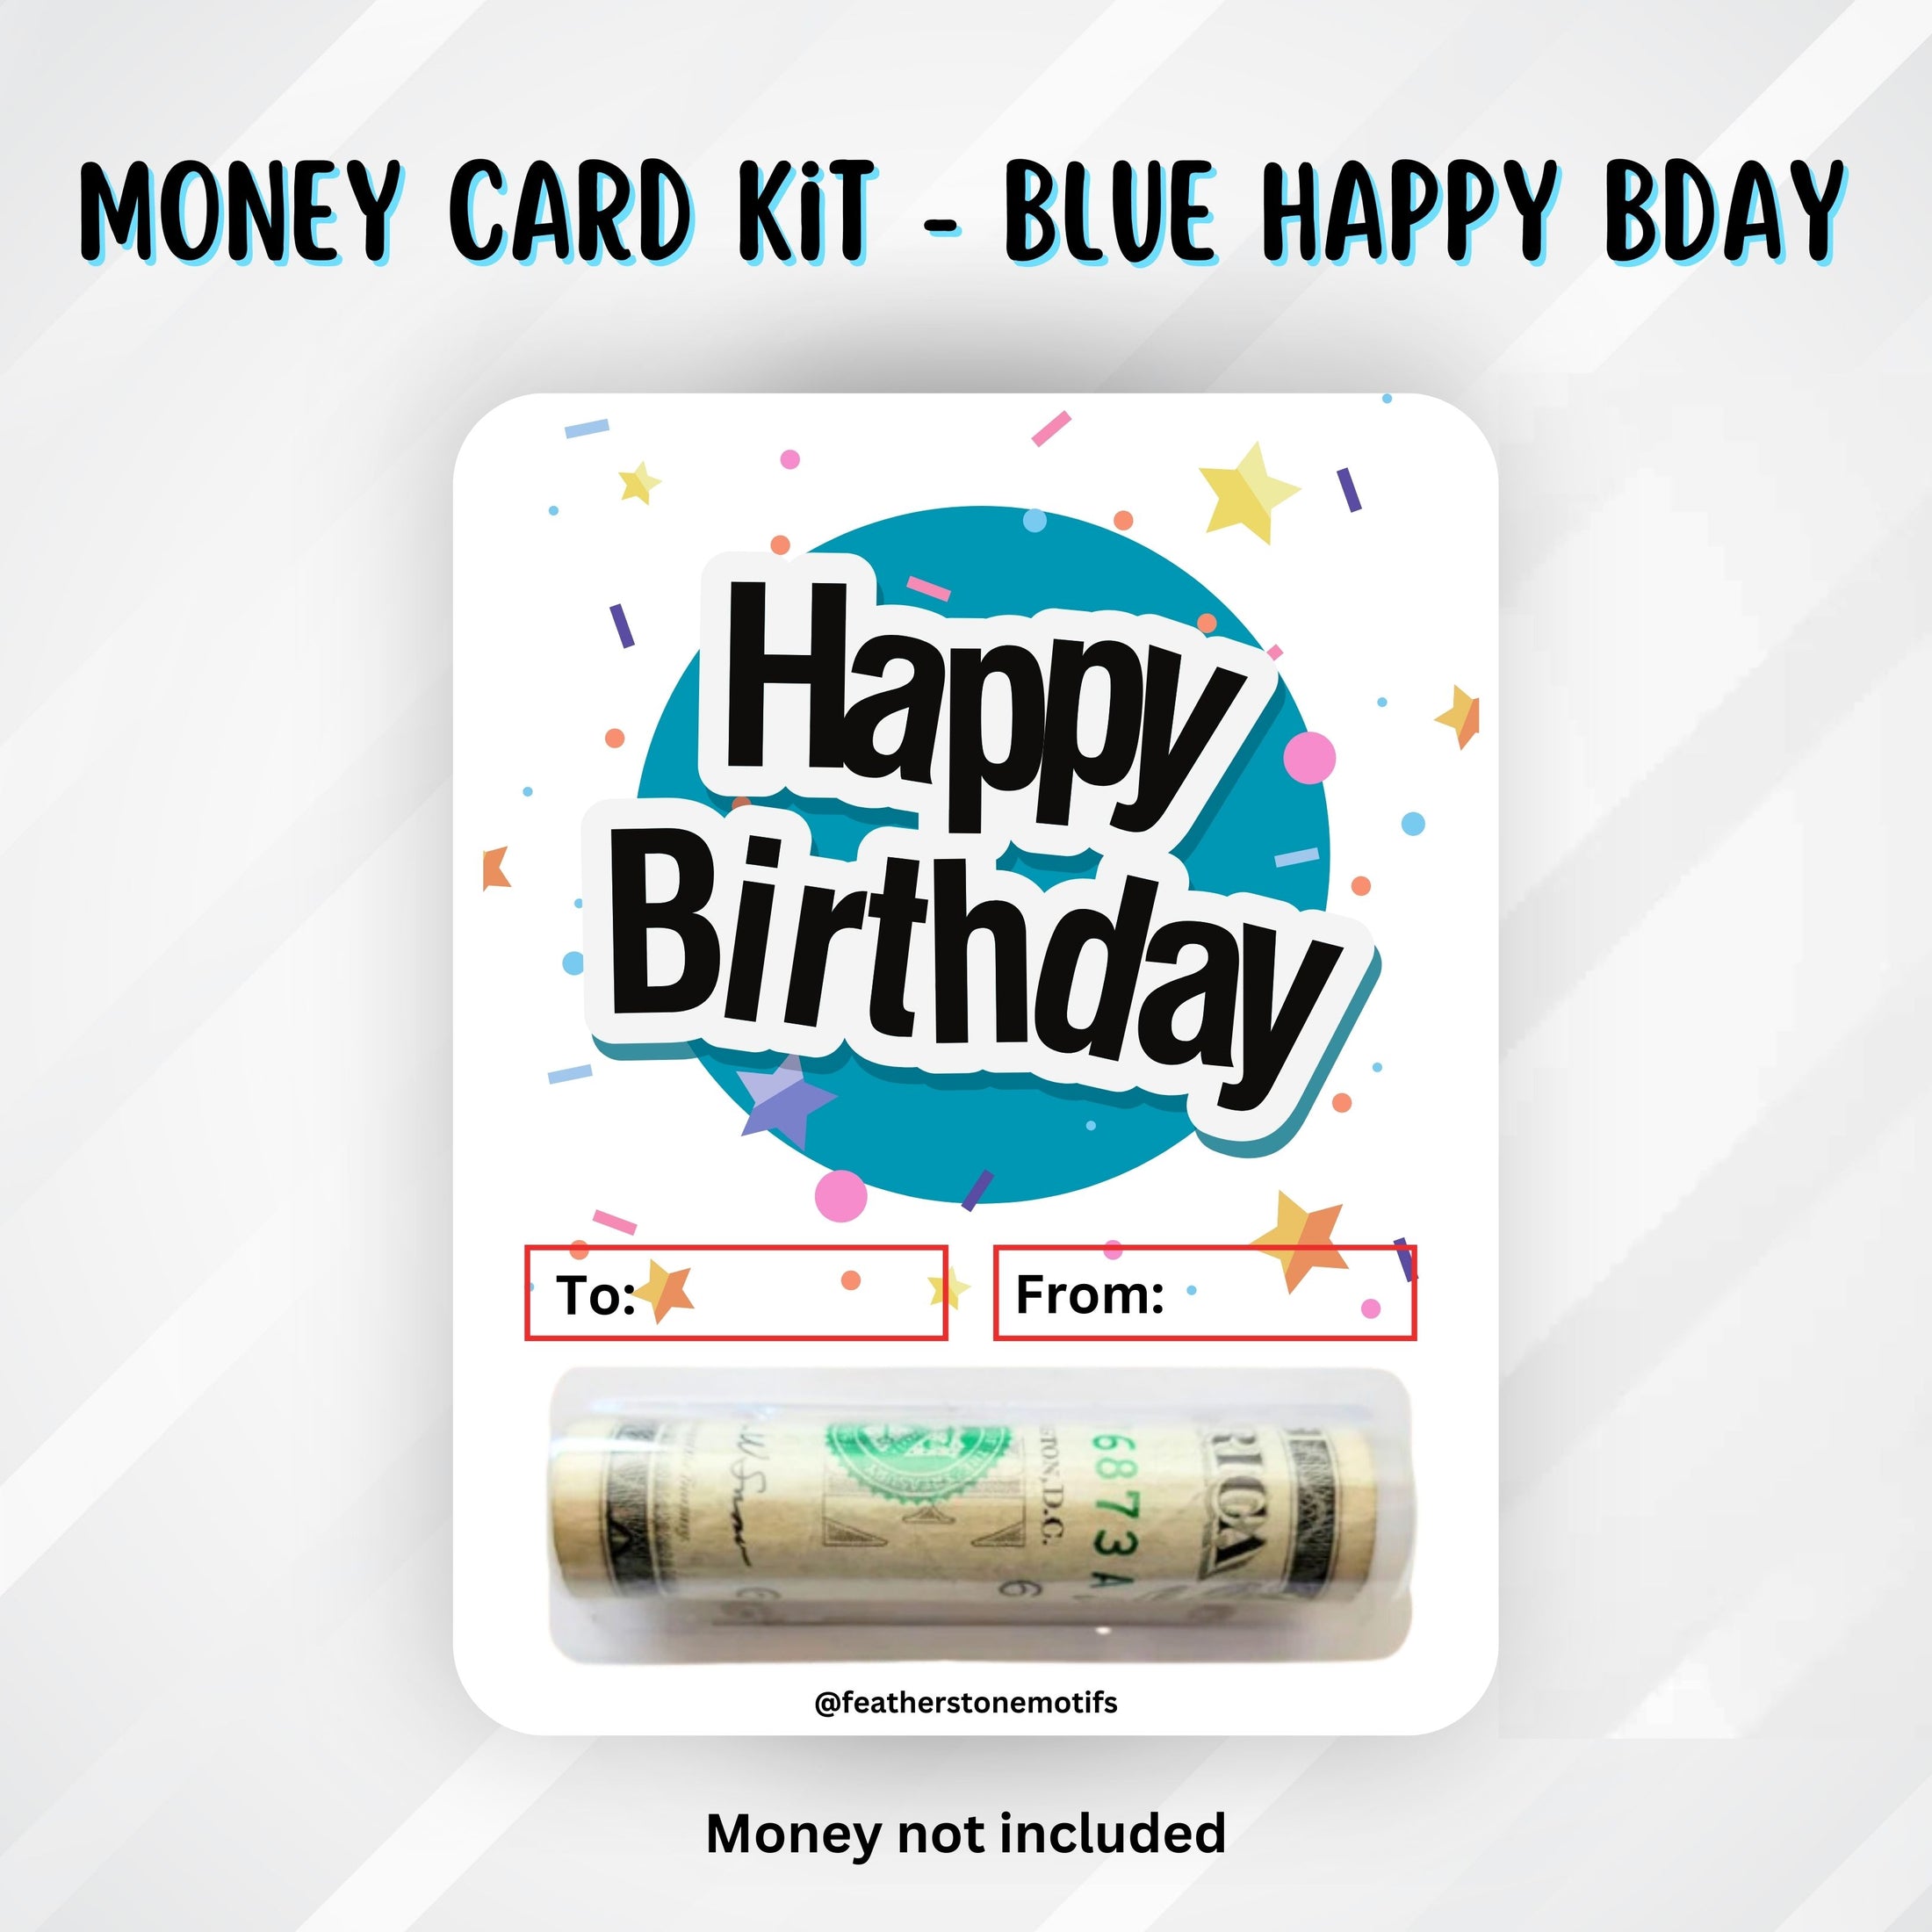 This image shows the money tube attached to the Blue Happy Birthday Money Card.